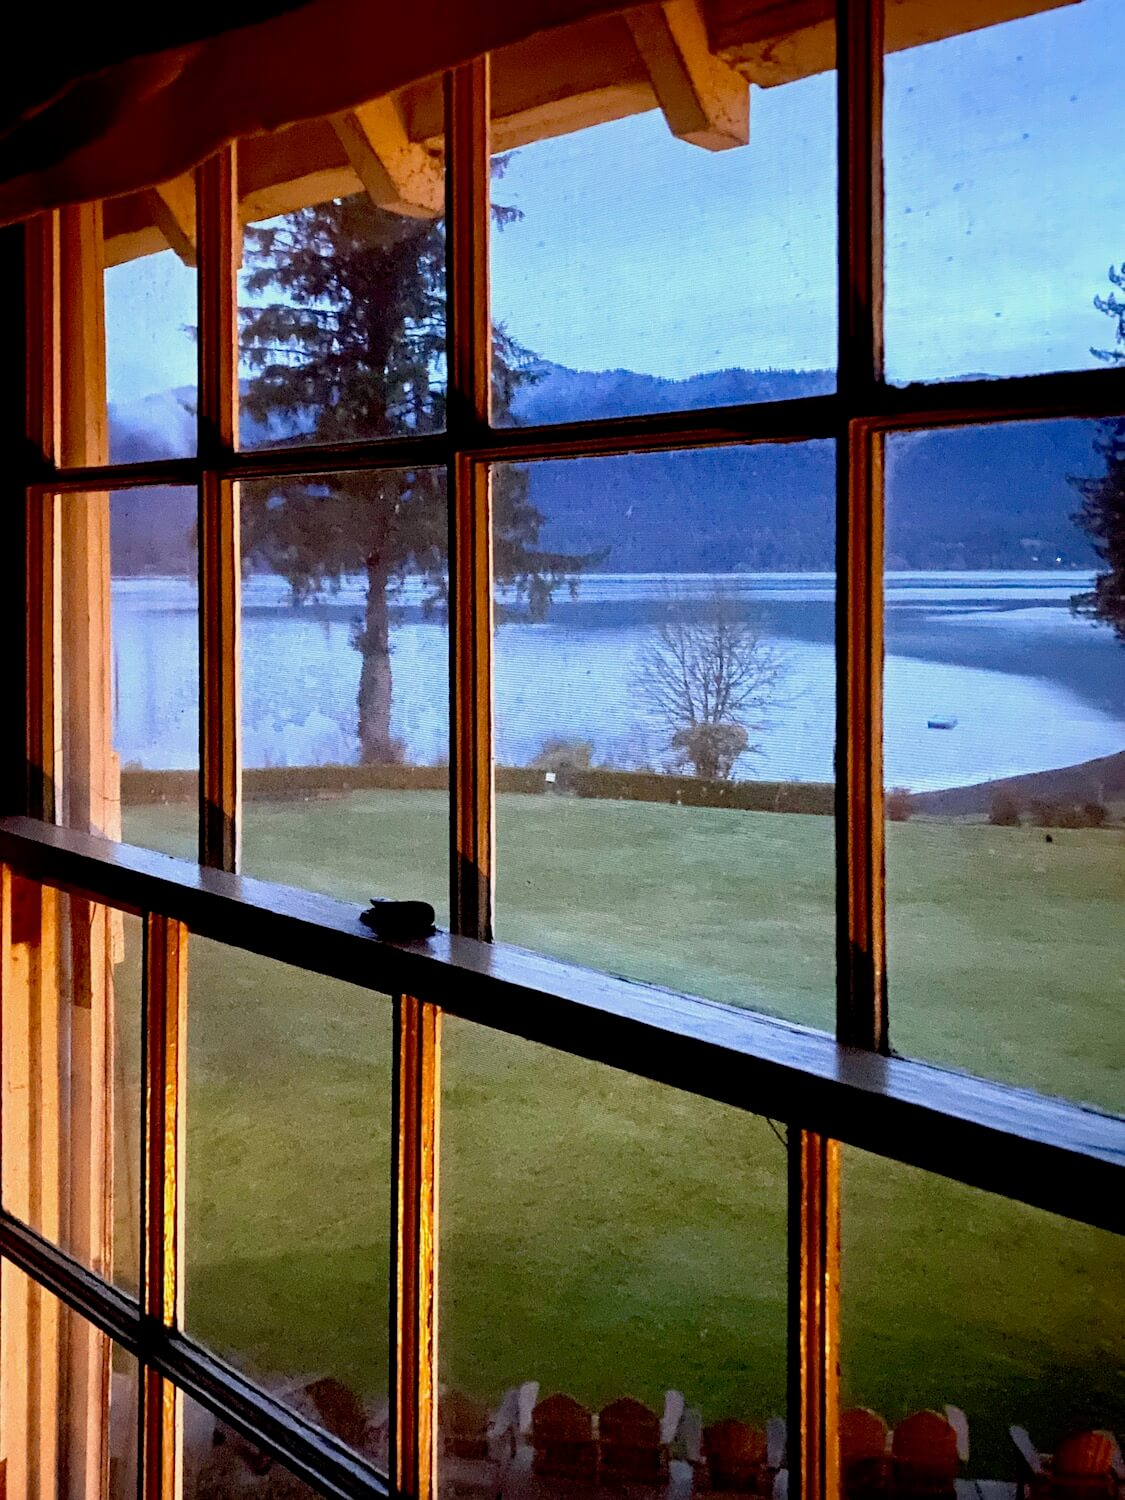 A sunrise view of Lake Quinault as viewed from one of the second story rooms in the historic lodge. The wood paned window reveals the green lawn flowing to the lake, just waking up for the day.